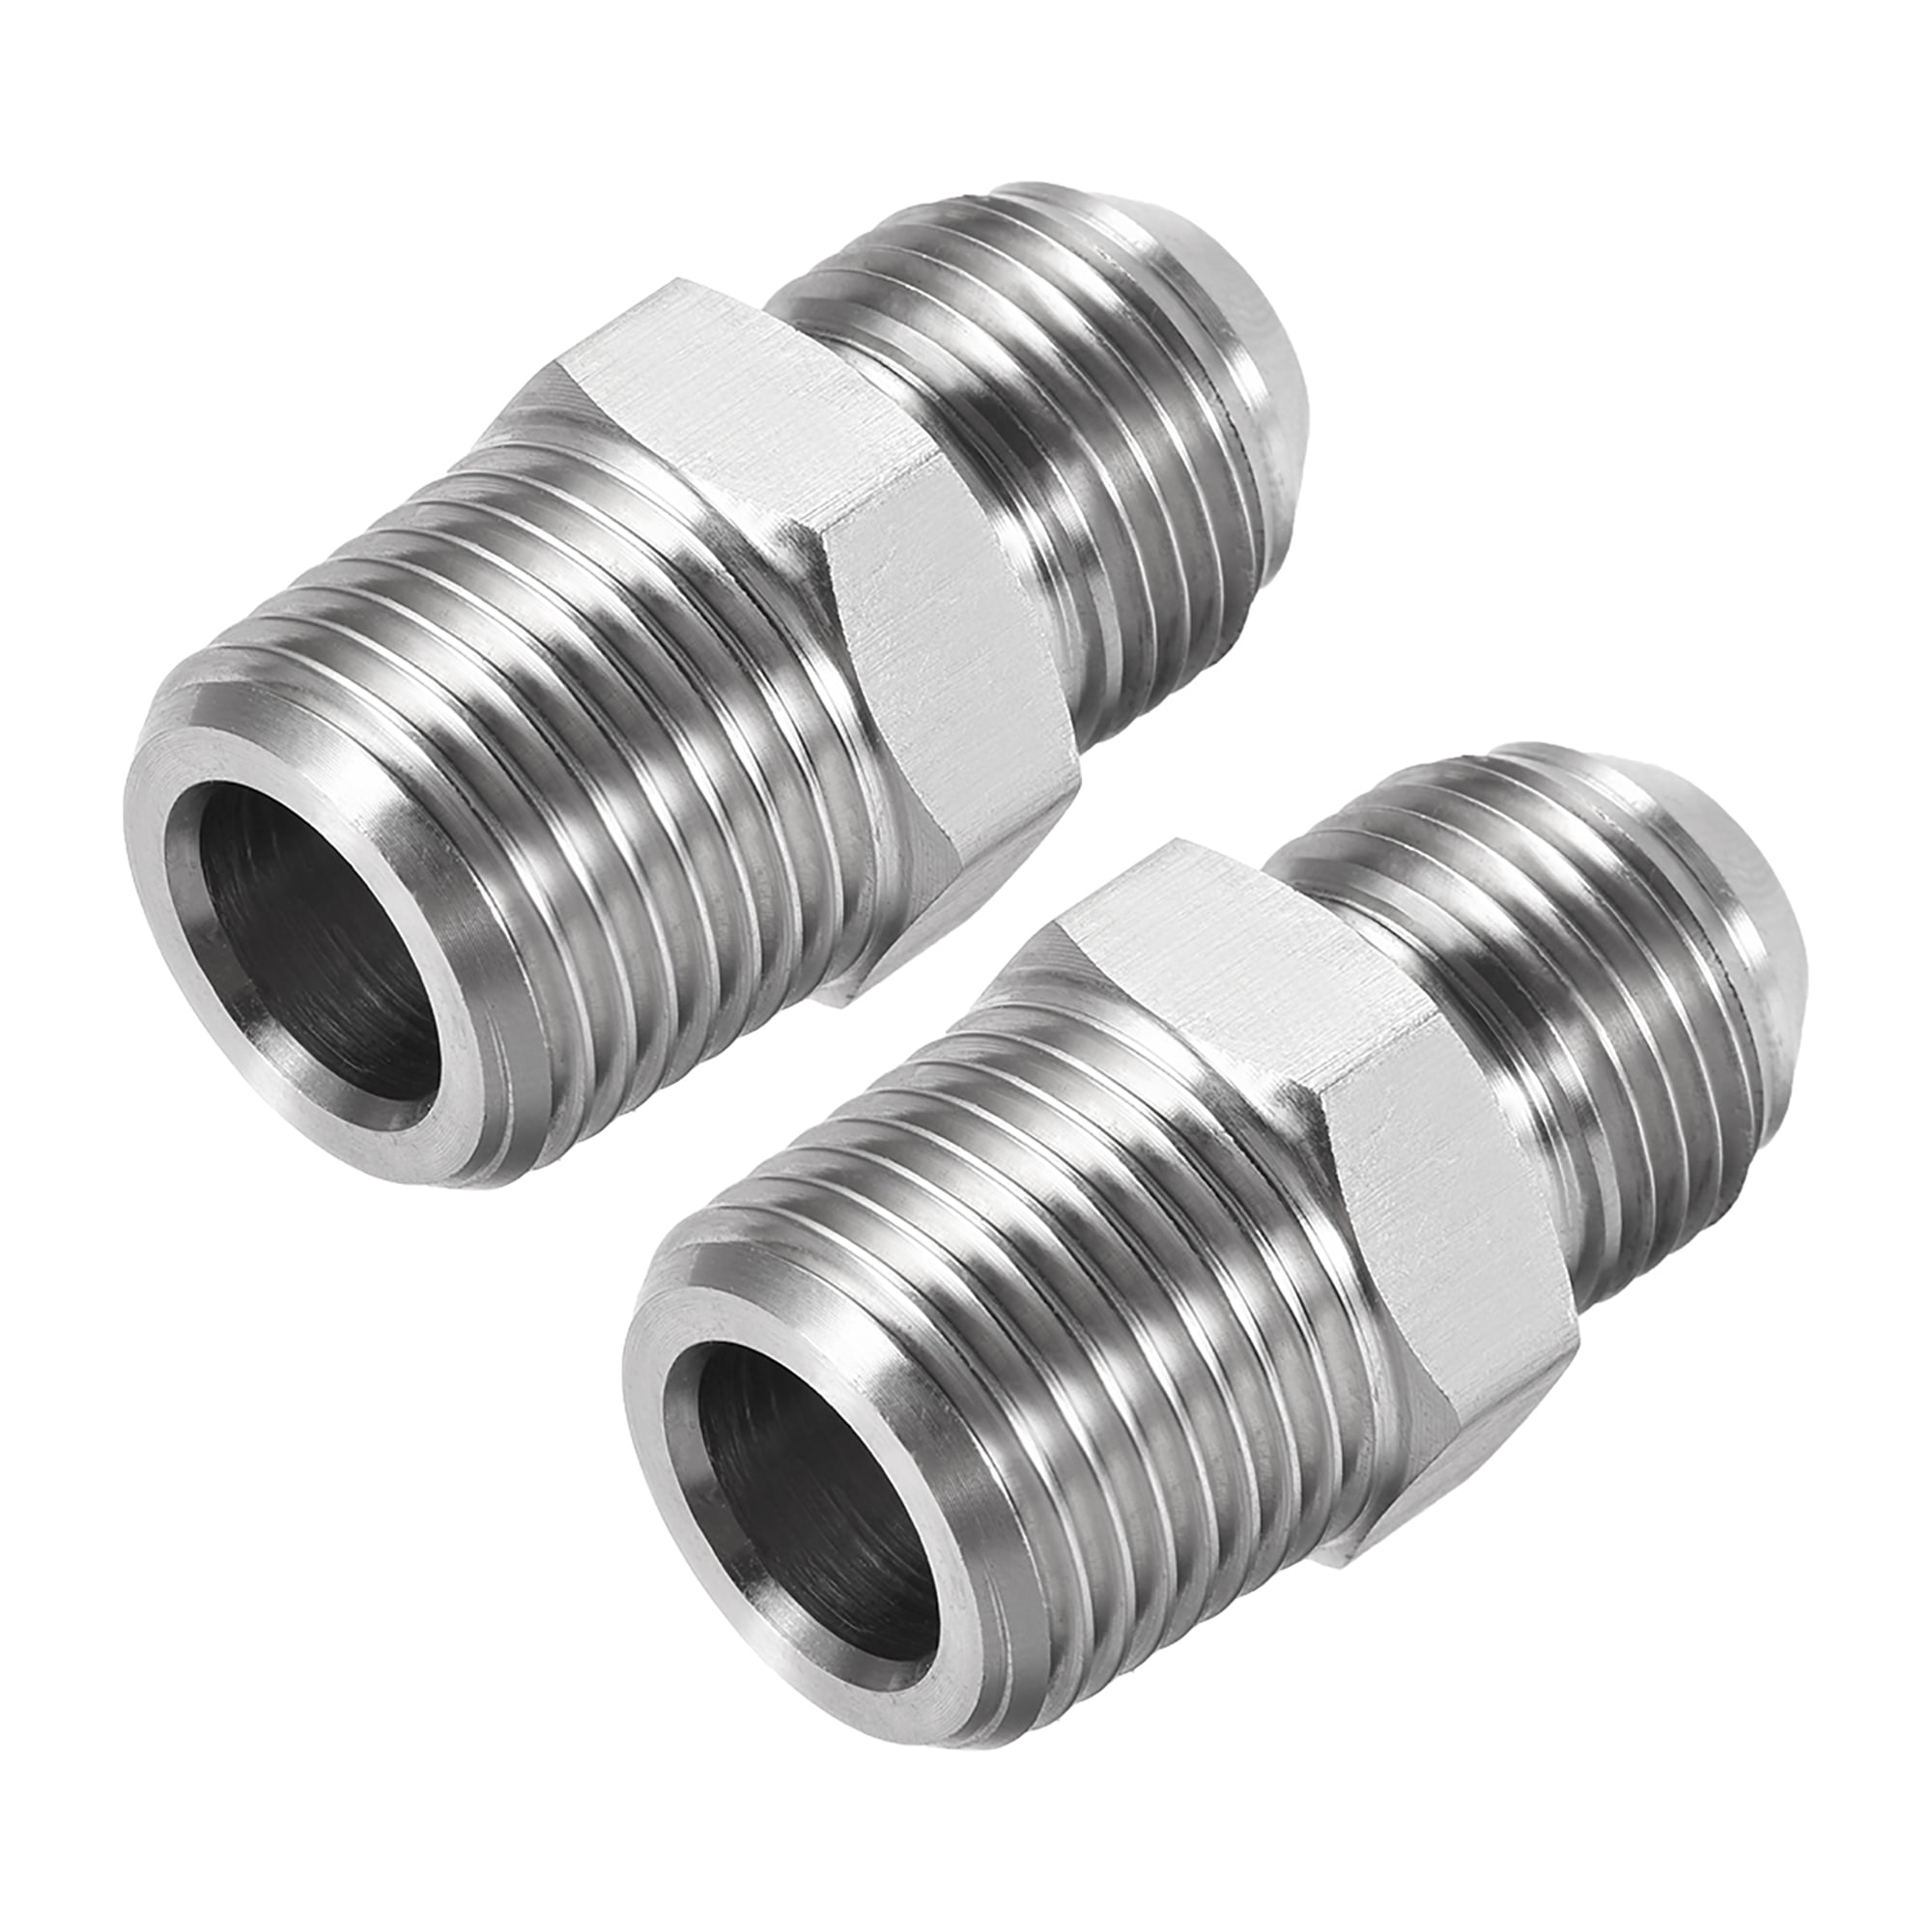 Nipple 1/2" x 1/4" NPT Female Stainless Steel 304 Threaded Reducer Pipe Fitting 